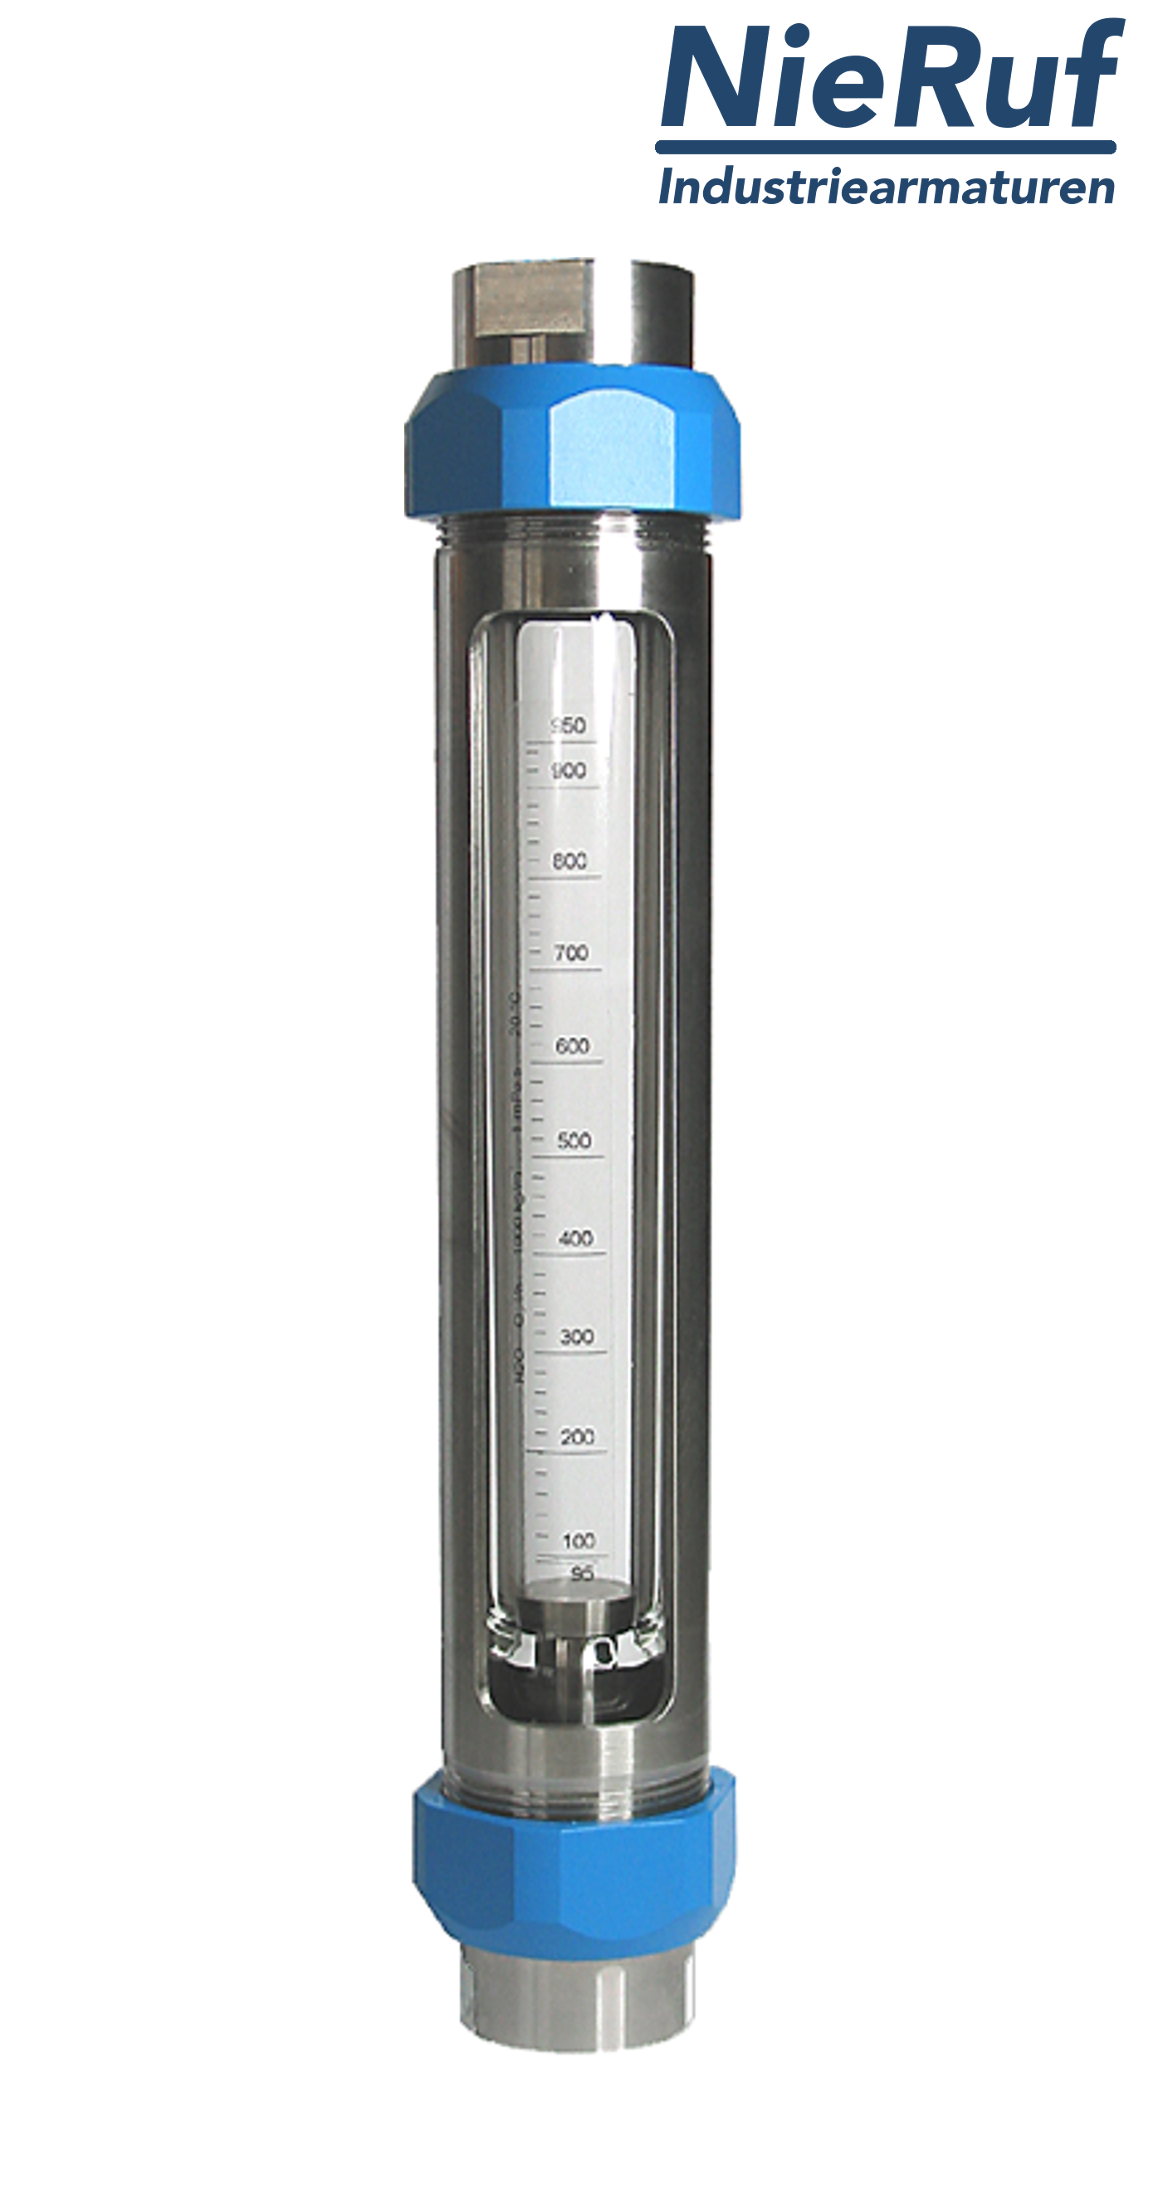 Variable area flowmeter stainless steel + borosilicate 1/4" inch 16.0 - 160 l/h water FKM